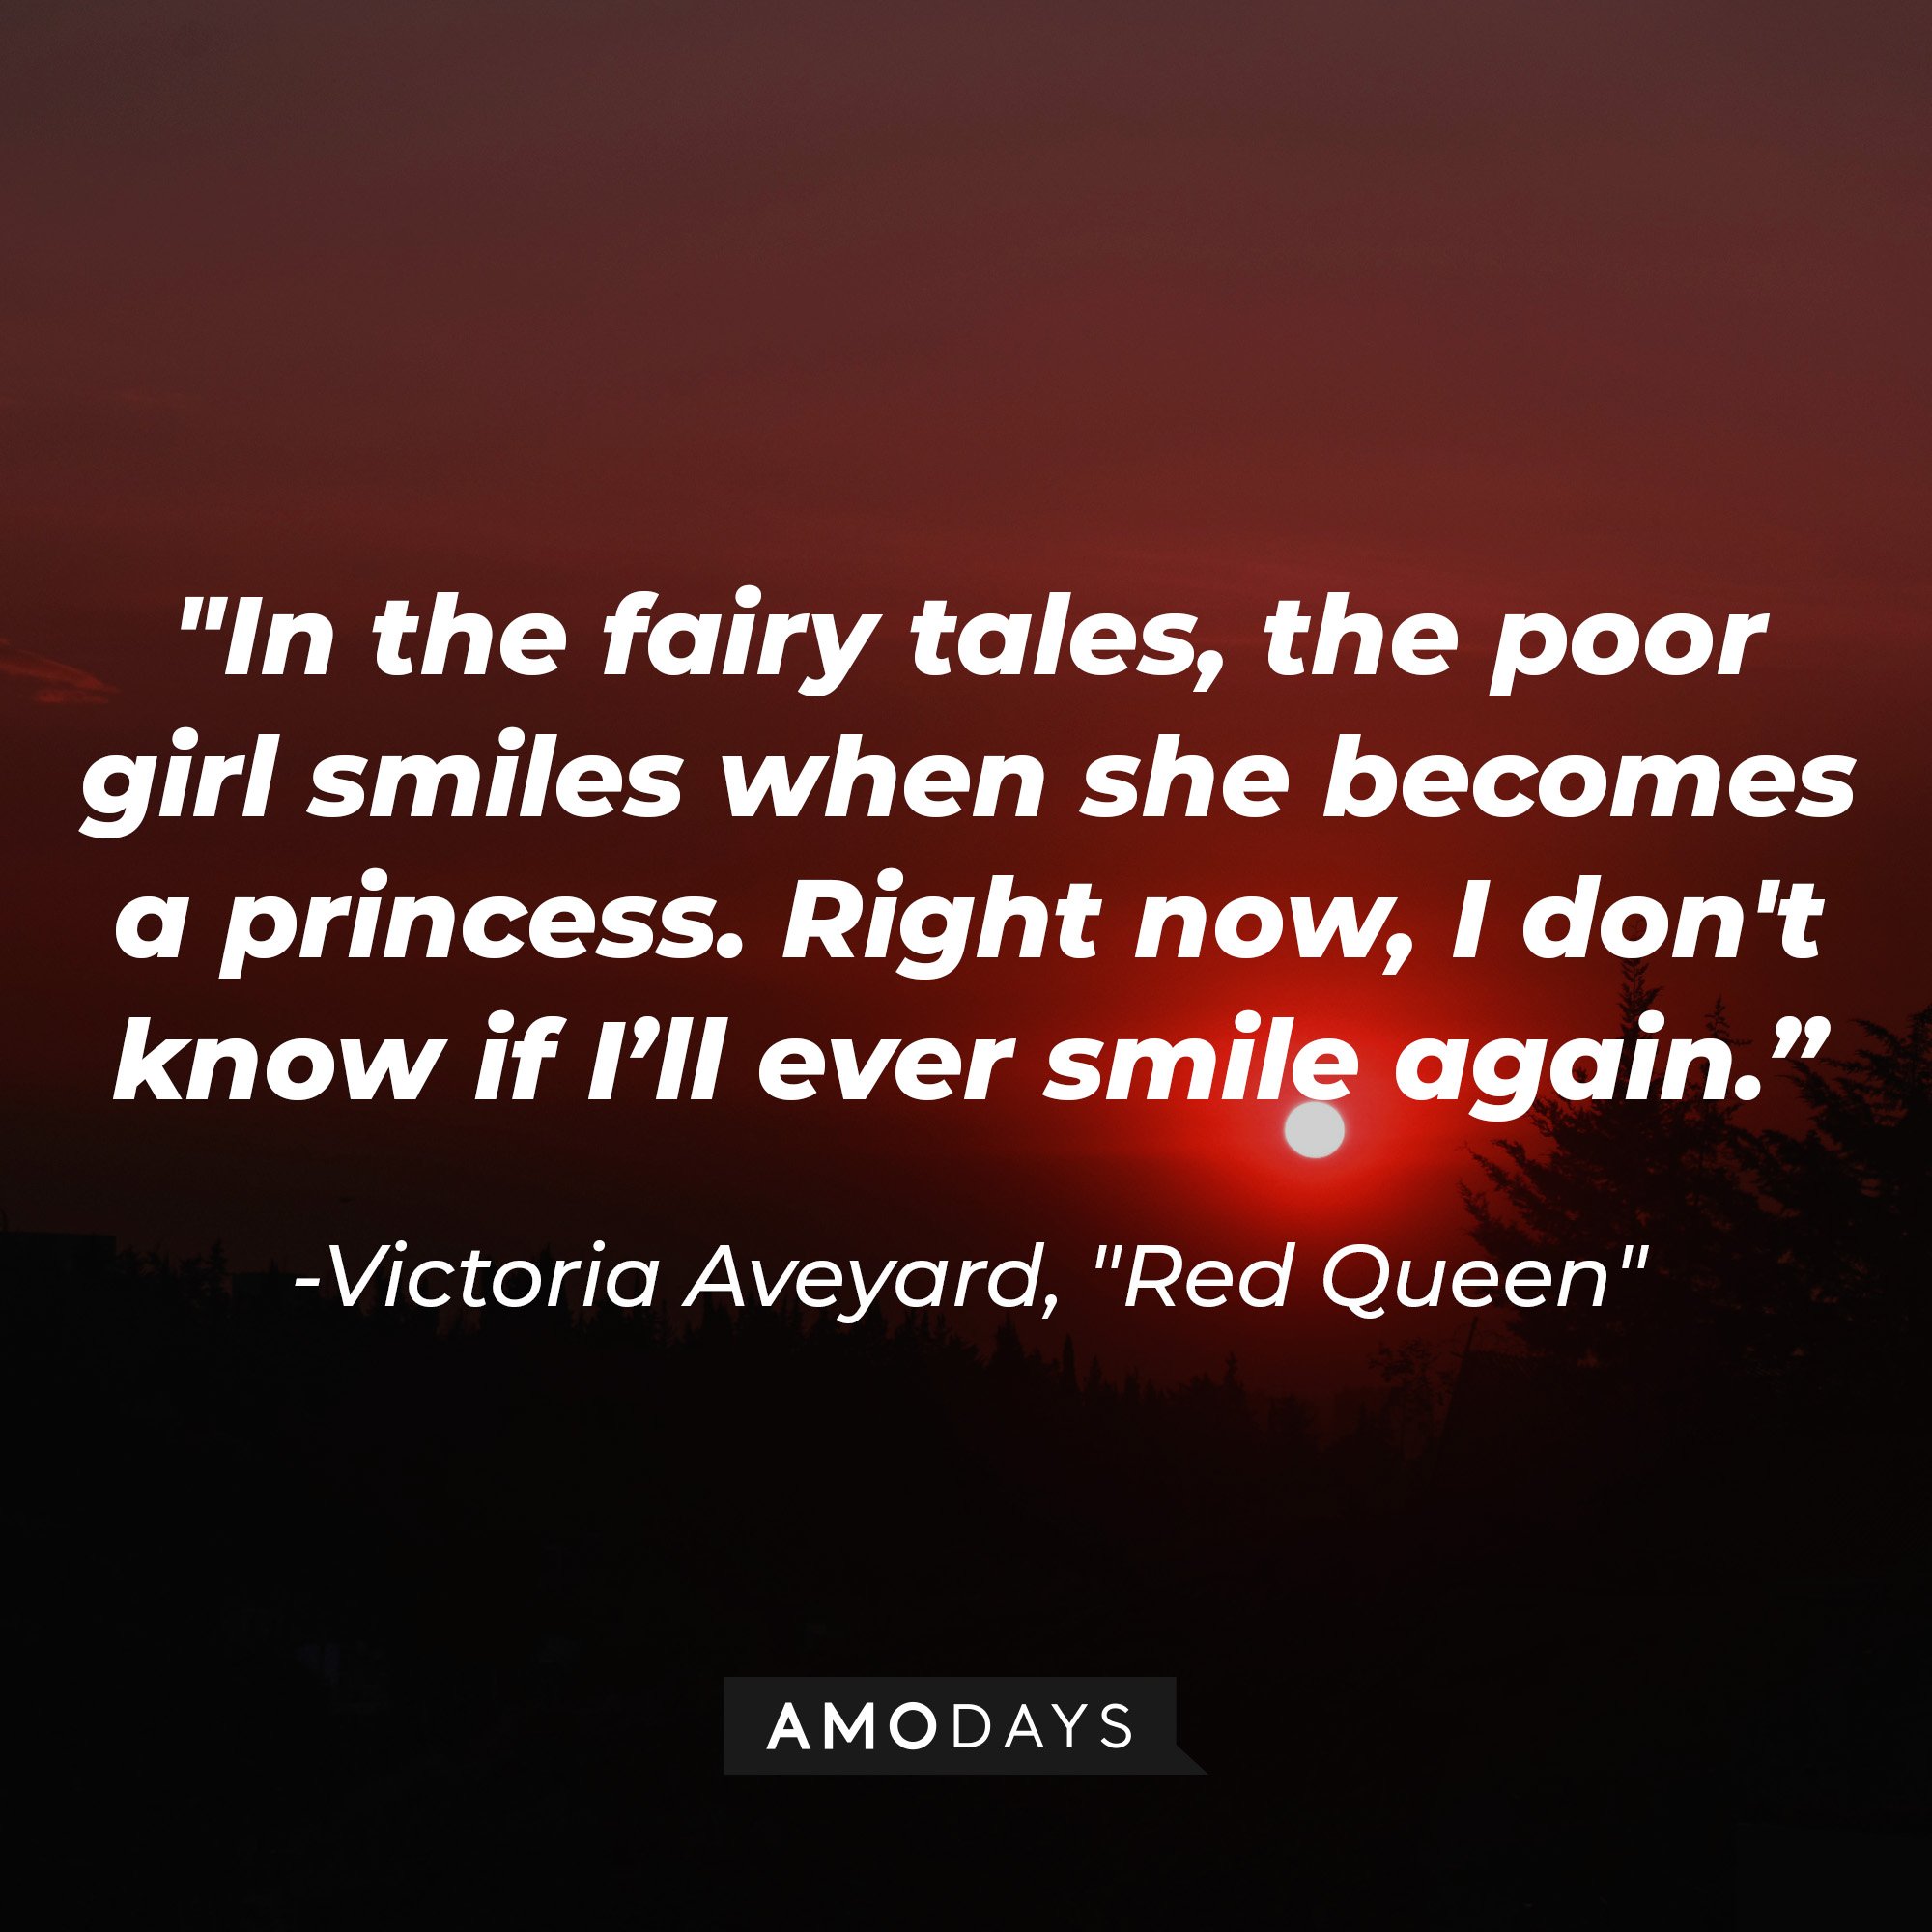  Victoria Aveyard’s quote in “Red Queen”: "In the fairy tales, the poor girl smiles when she becomes a princess. Right now, I don't know if I'll ever smile again." | Image: AmoDays